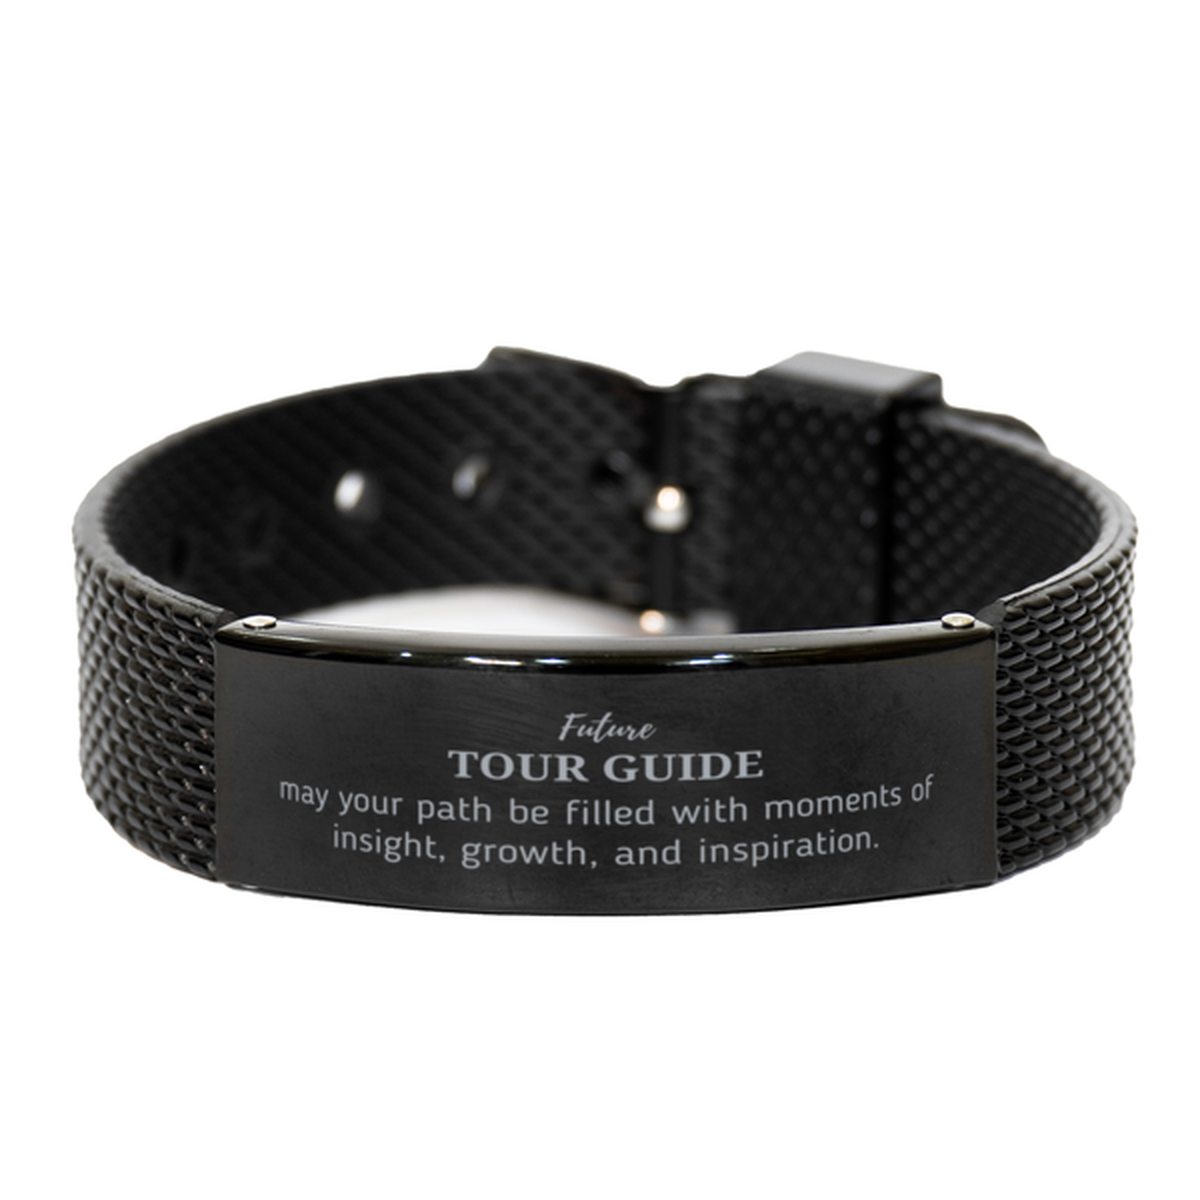 Future Tour Guide Gifts, May your path be filled with moments of insight, Graduation Gifts for New Tour Guide, Christmas Unique Black Shark Mesh Bracelet For Men, Women, Friends